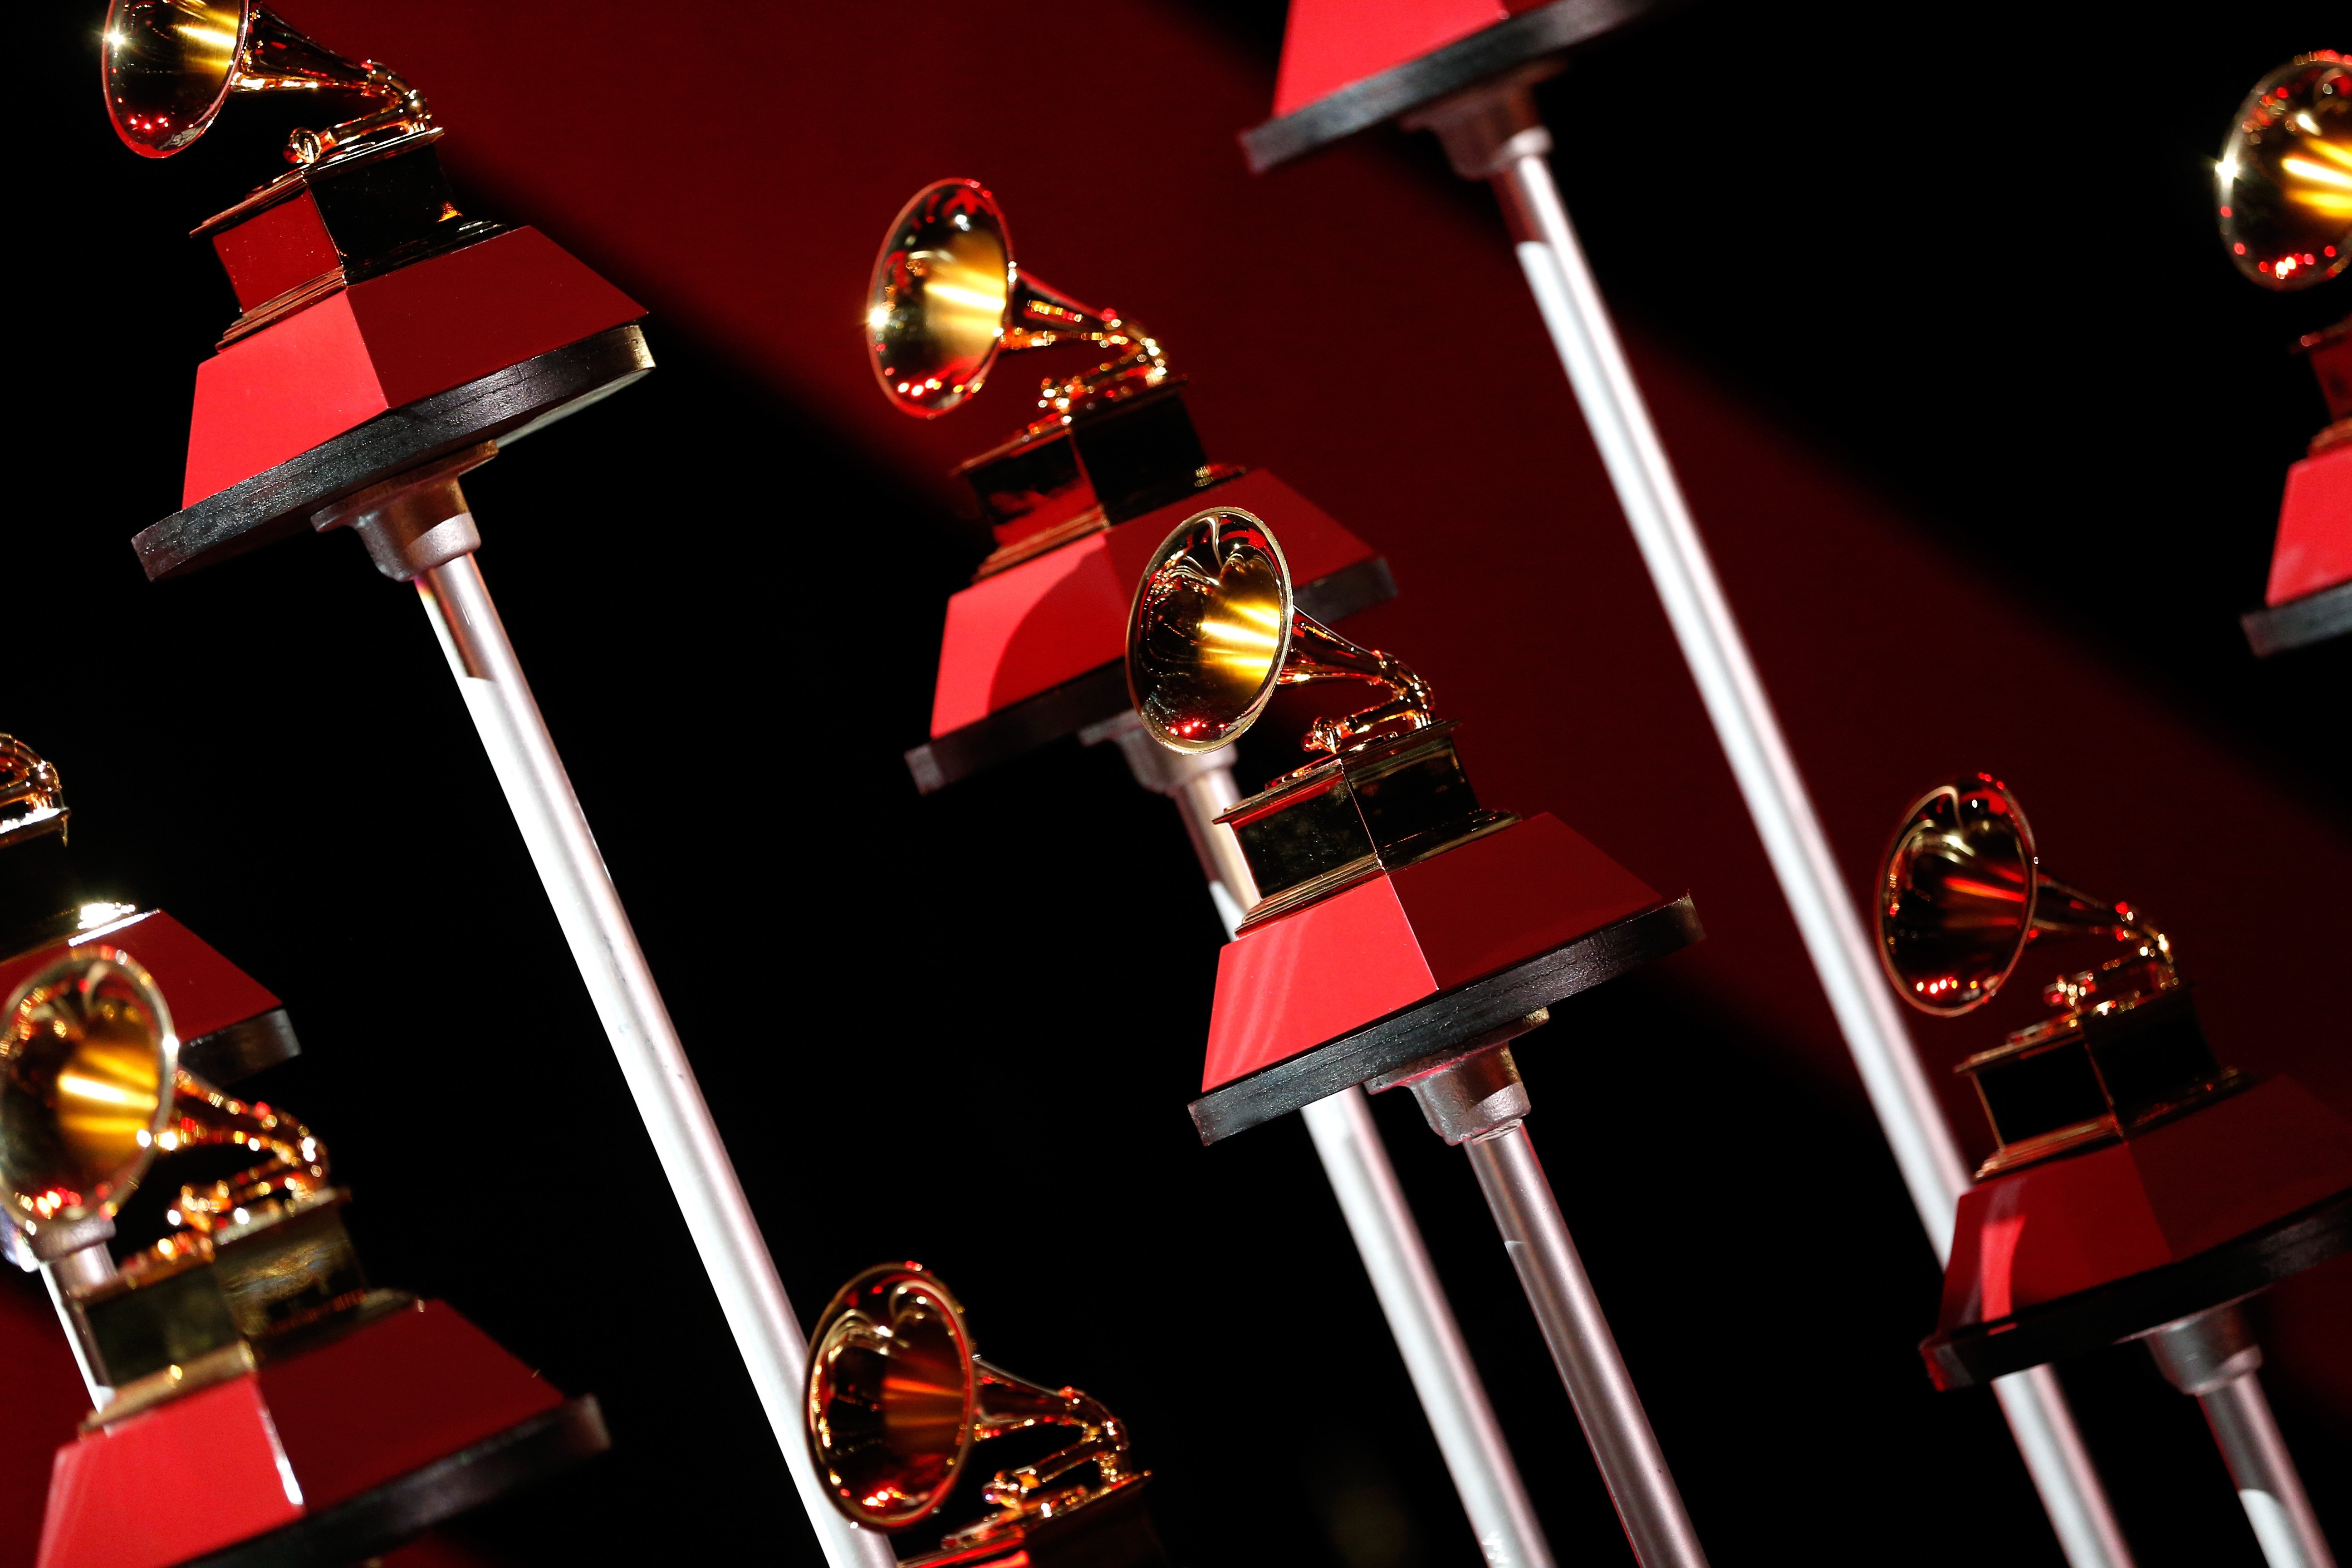 A view of the Latin Grammy Award trophy